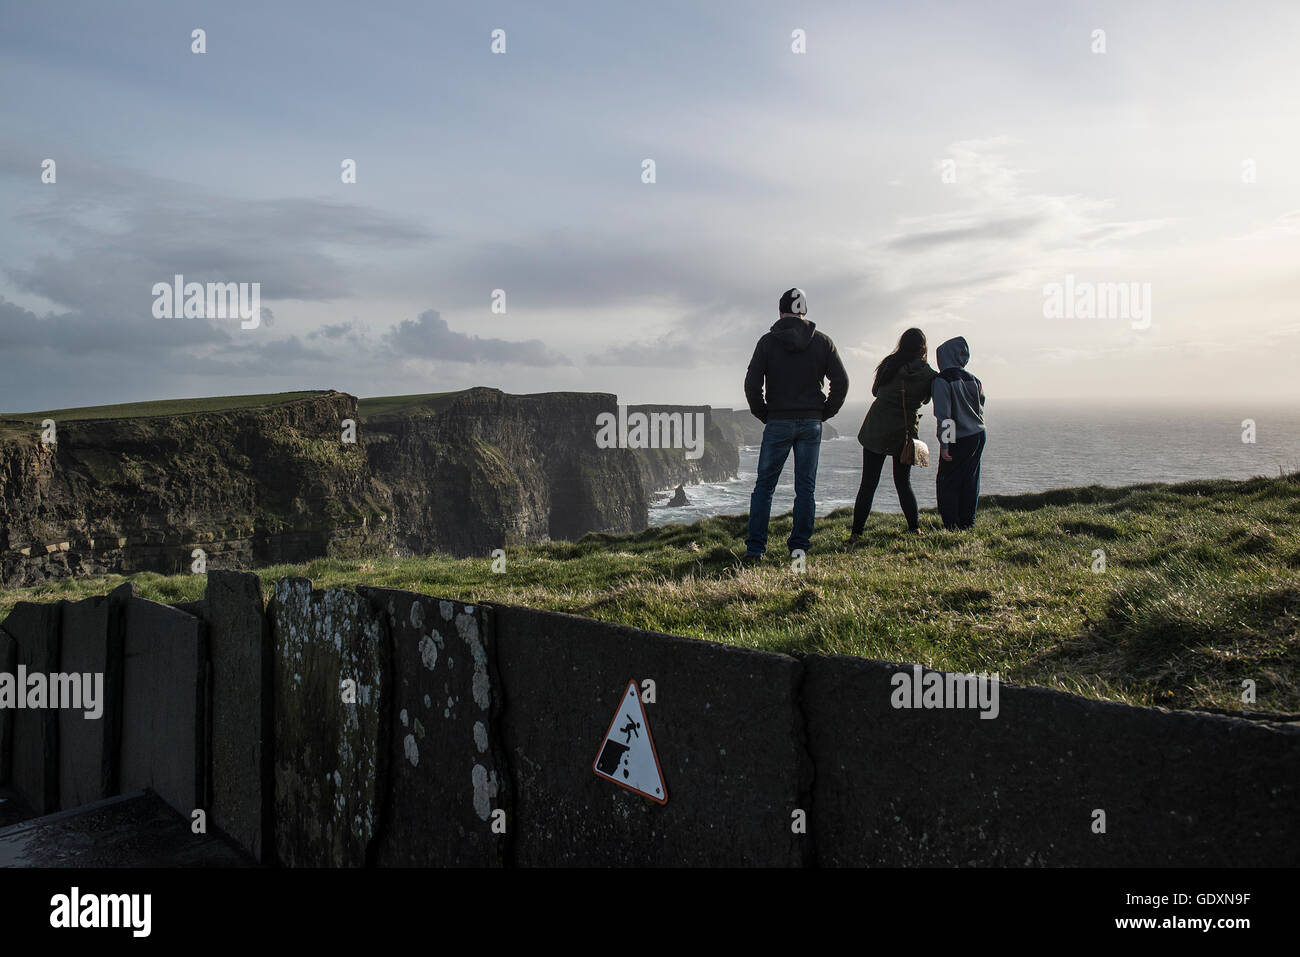 A family of tourists watch the view from the Cliffs of Moher, which are located at the southwestern edge of the Burren region in County Clare, Ireland. They rise 120 meters above the Atlantic Ocean at Hag's Head and reach their maximum height of 214 meters just north of O'Brien's Tower, eight kilometers to the north. Stock Photo